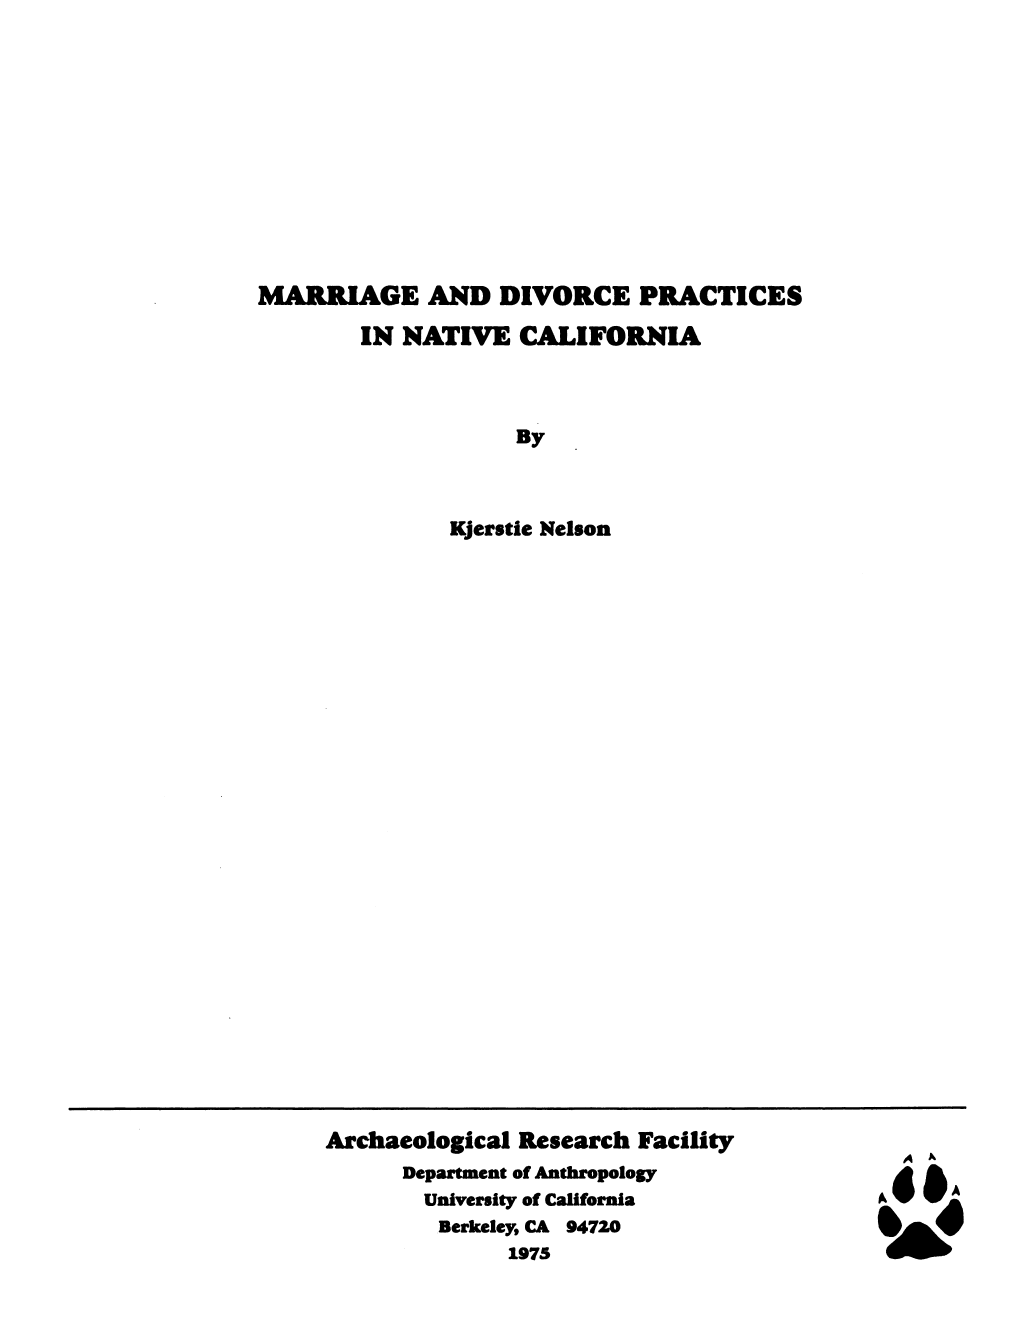 Marriage and Divorce Practices in Native California